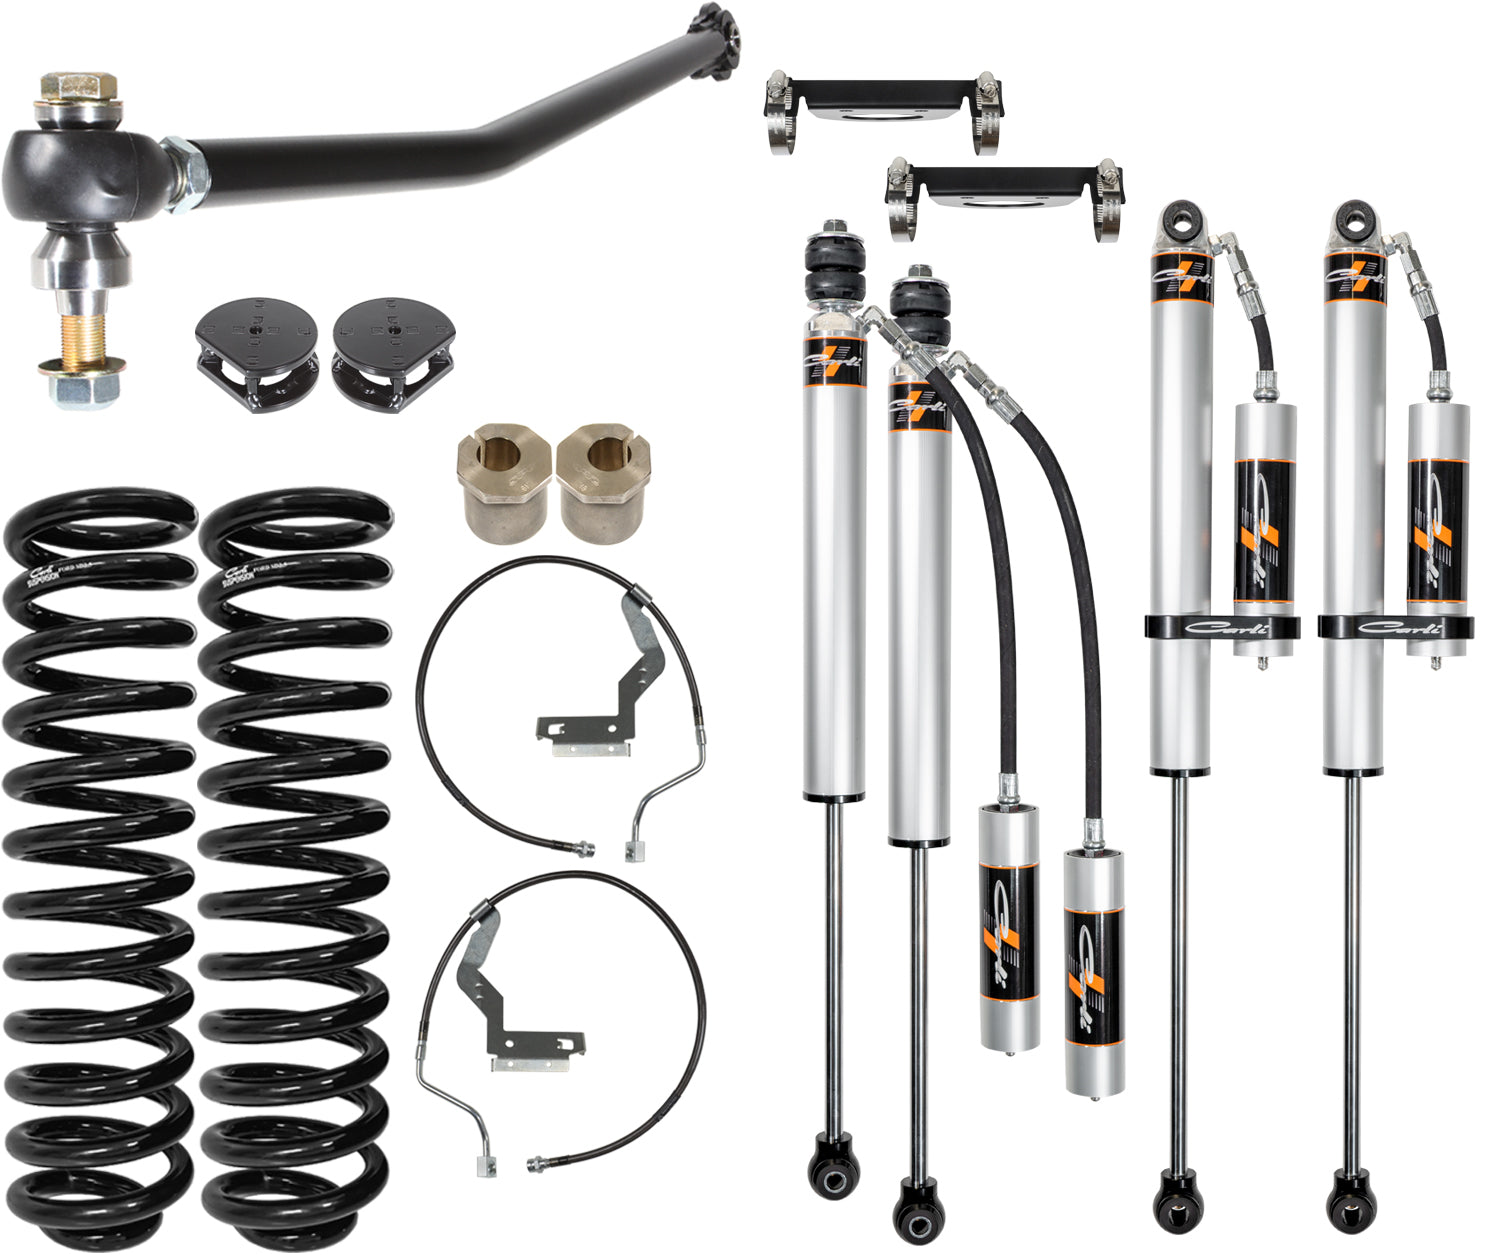 3" Backcountry Suspension System